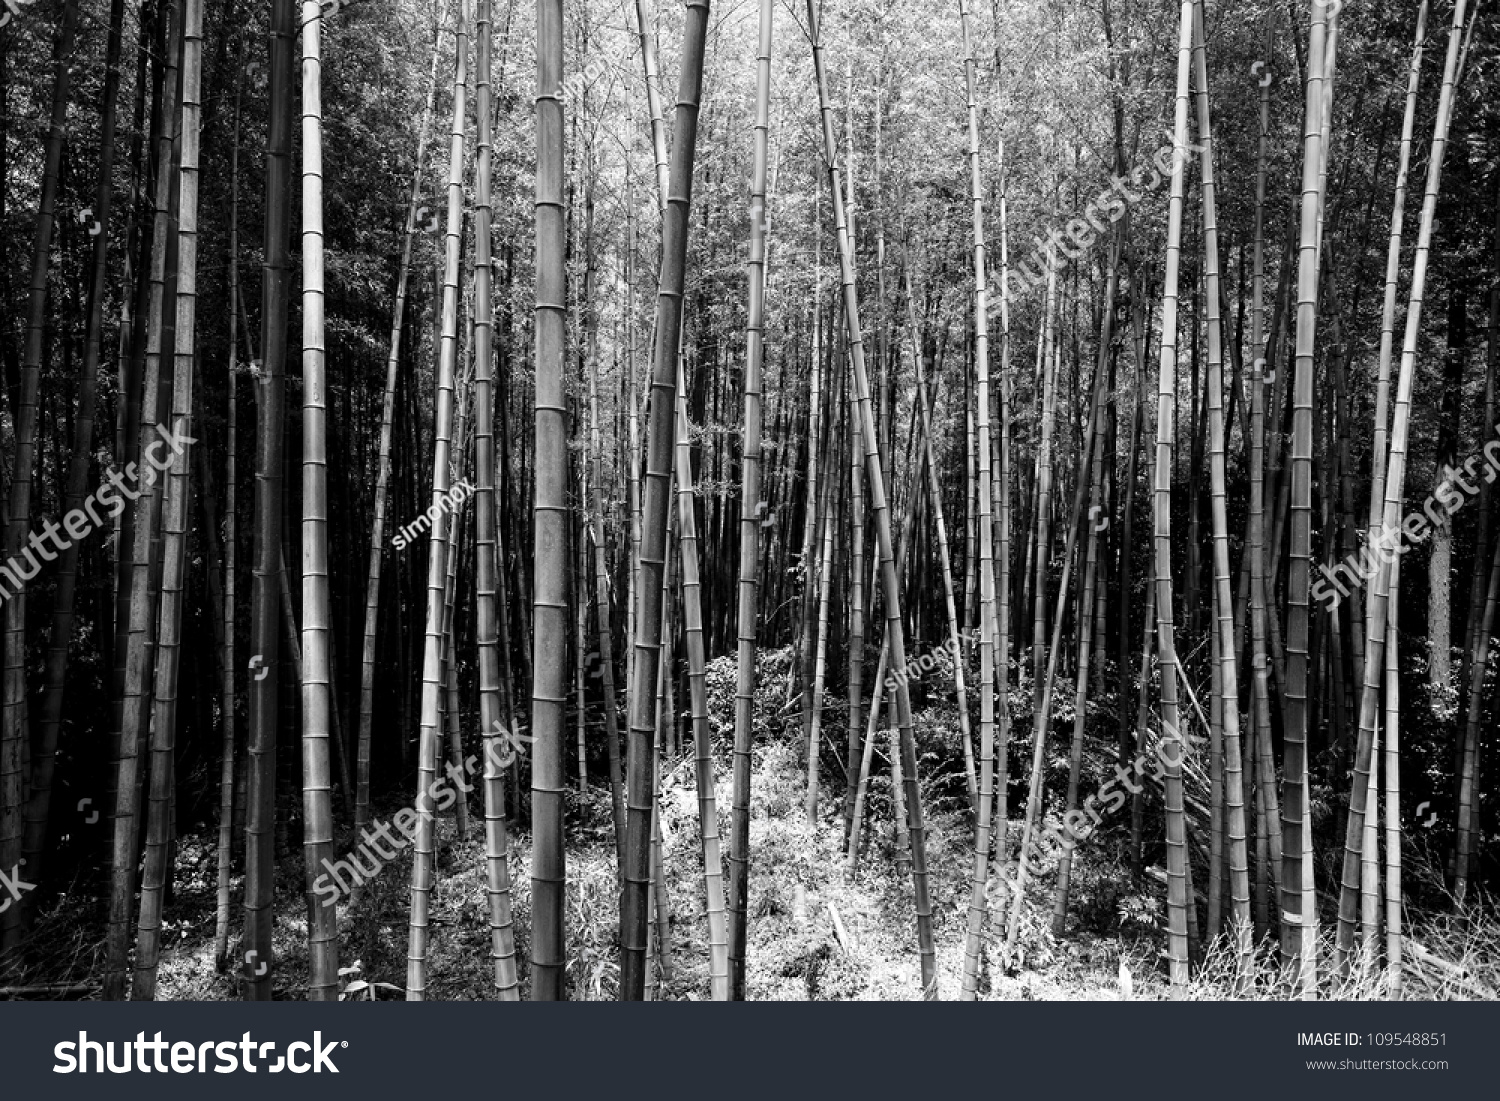 Black And White Bamboo Forest Stock Photo 109548851 : Shutterstock